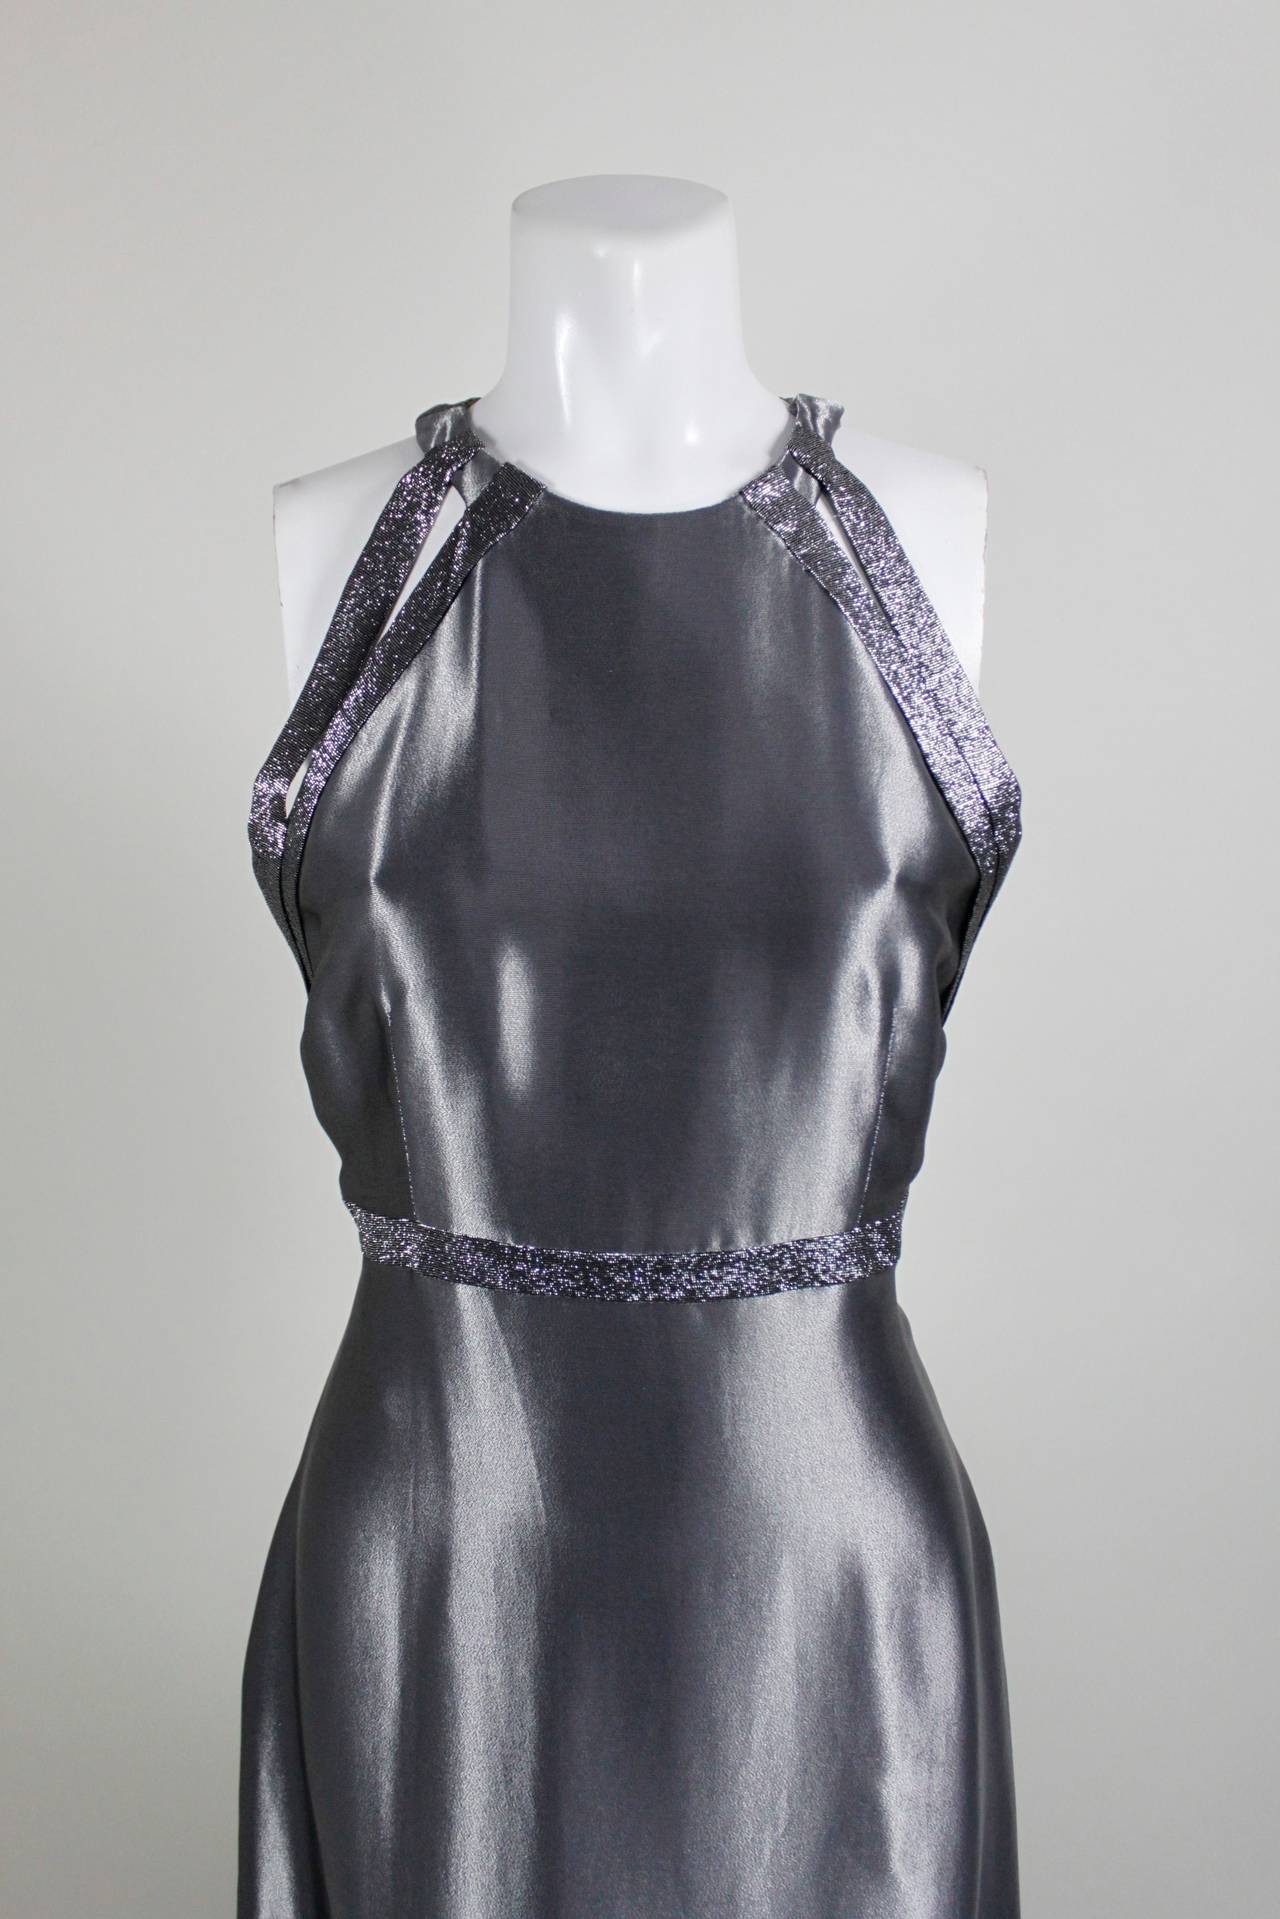 This sporty gown from Genny features gunmetal wet look metallic fabric trimmed with gorgeous iridescent lurex. The racer neckline is modern, chic, and interesting.